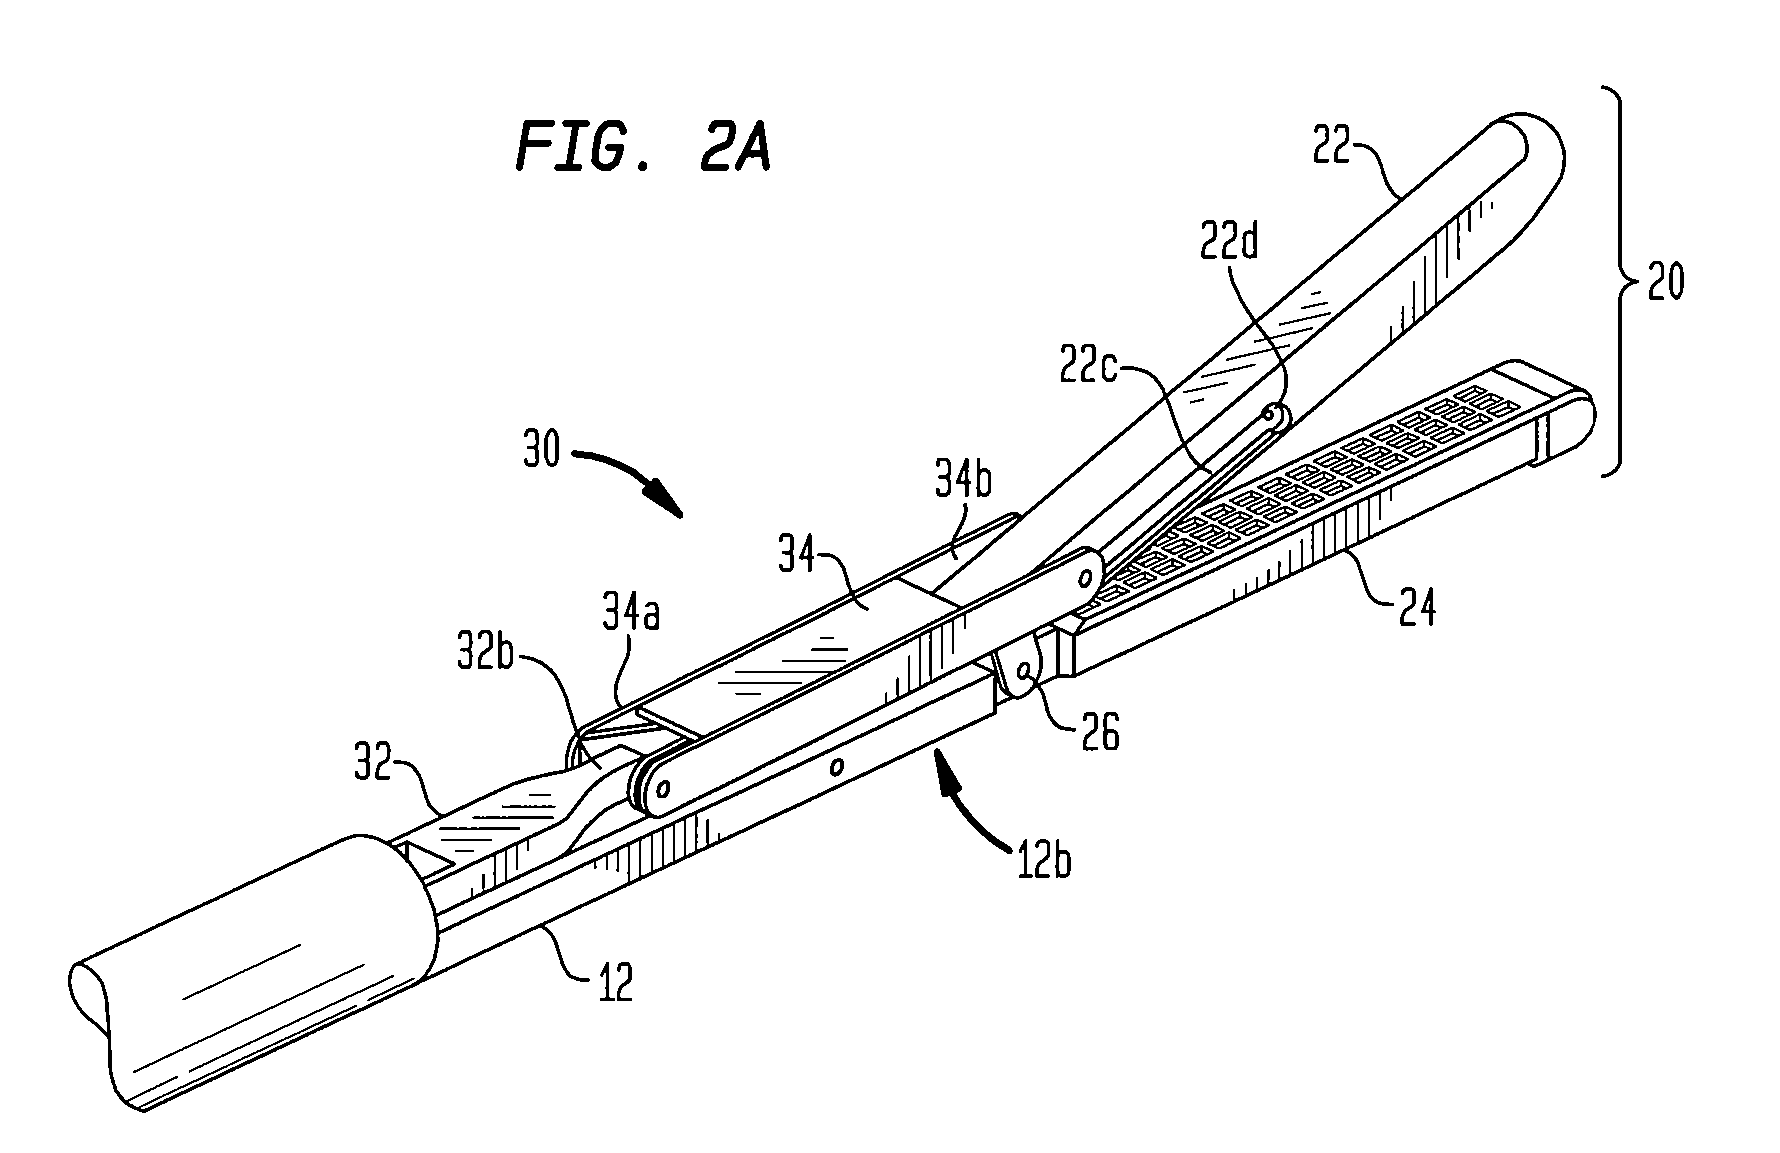 Surgical stapler with an end effector support